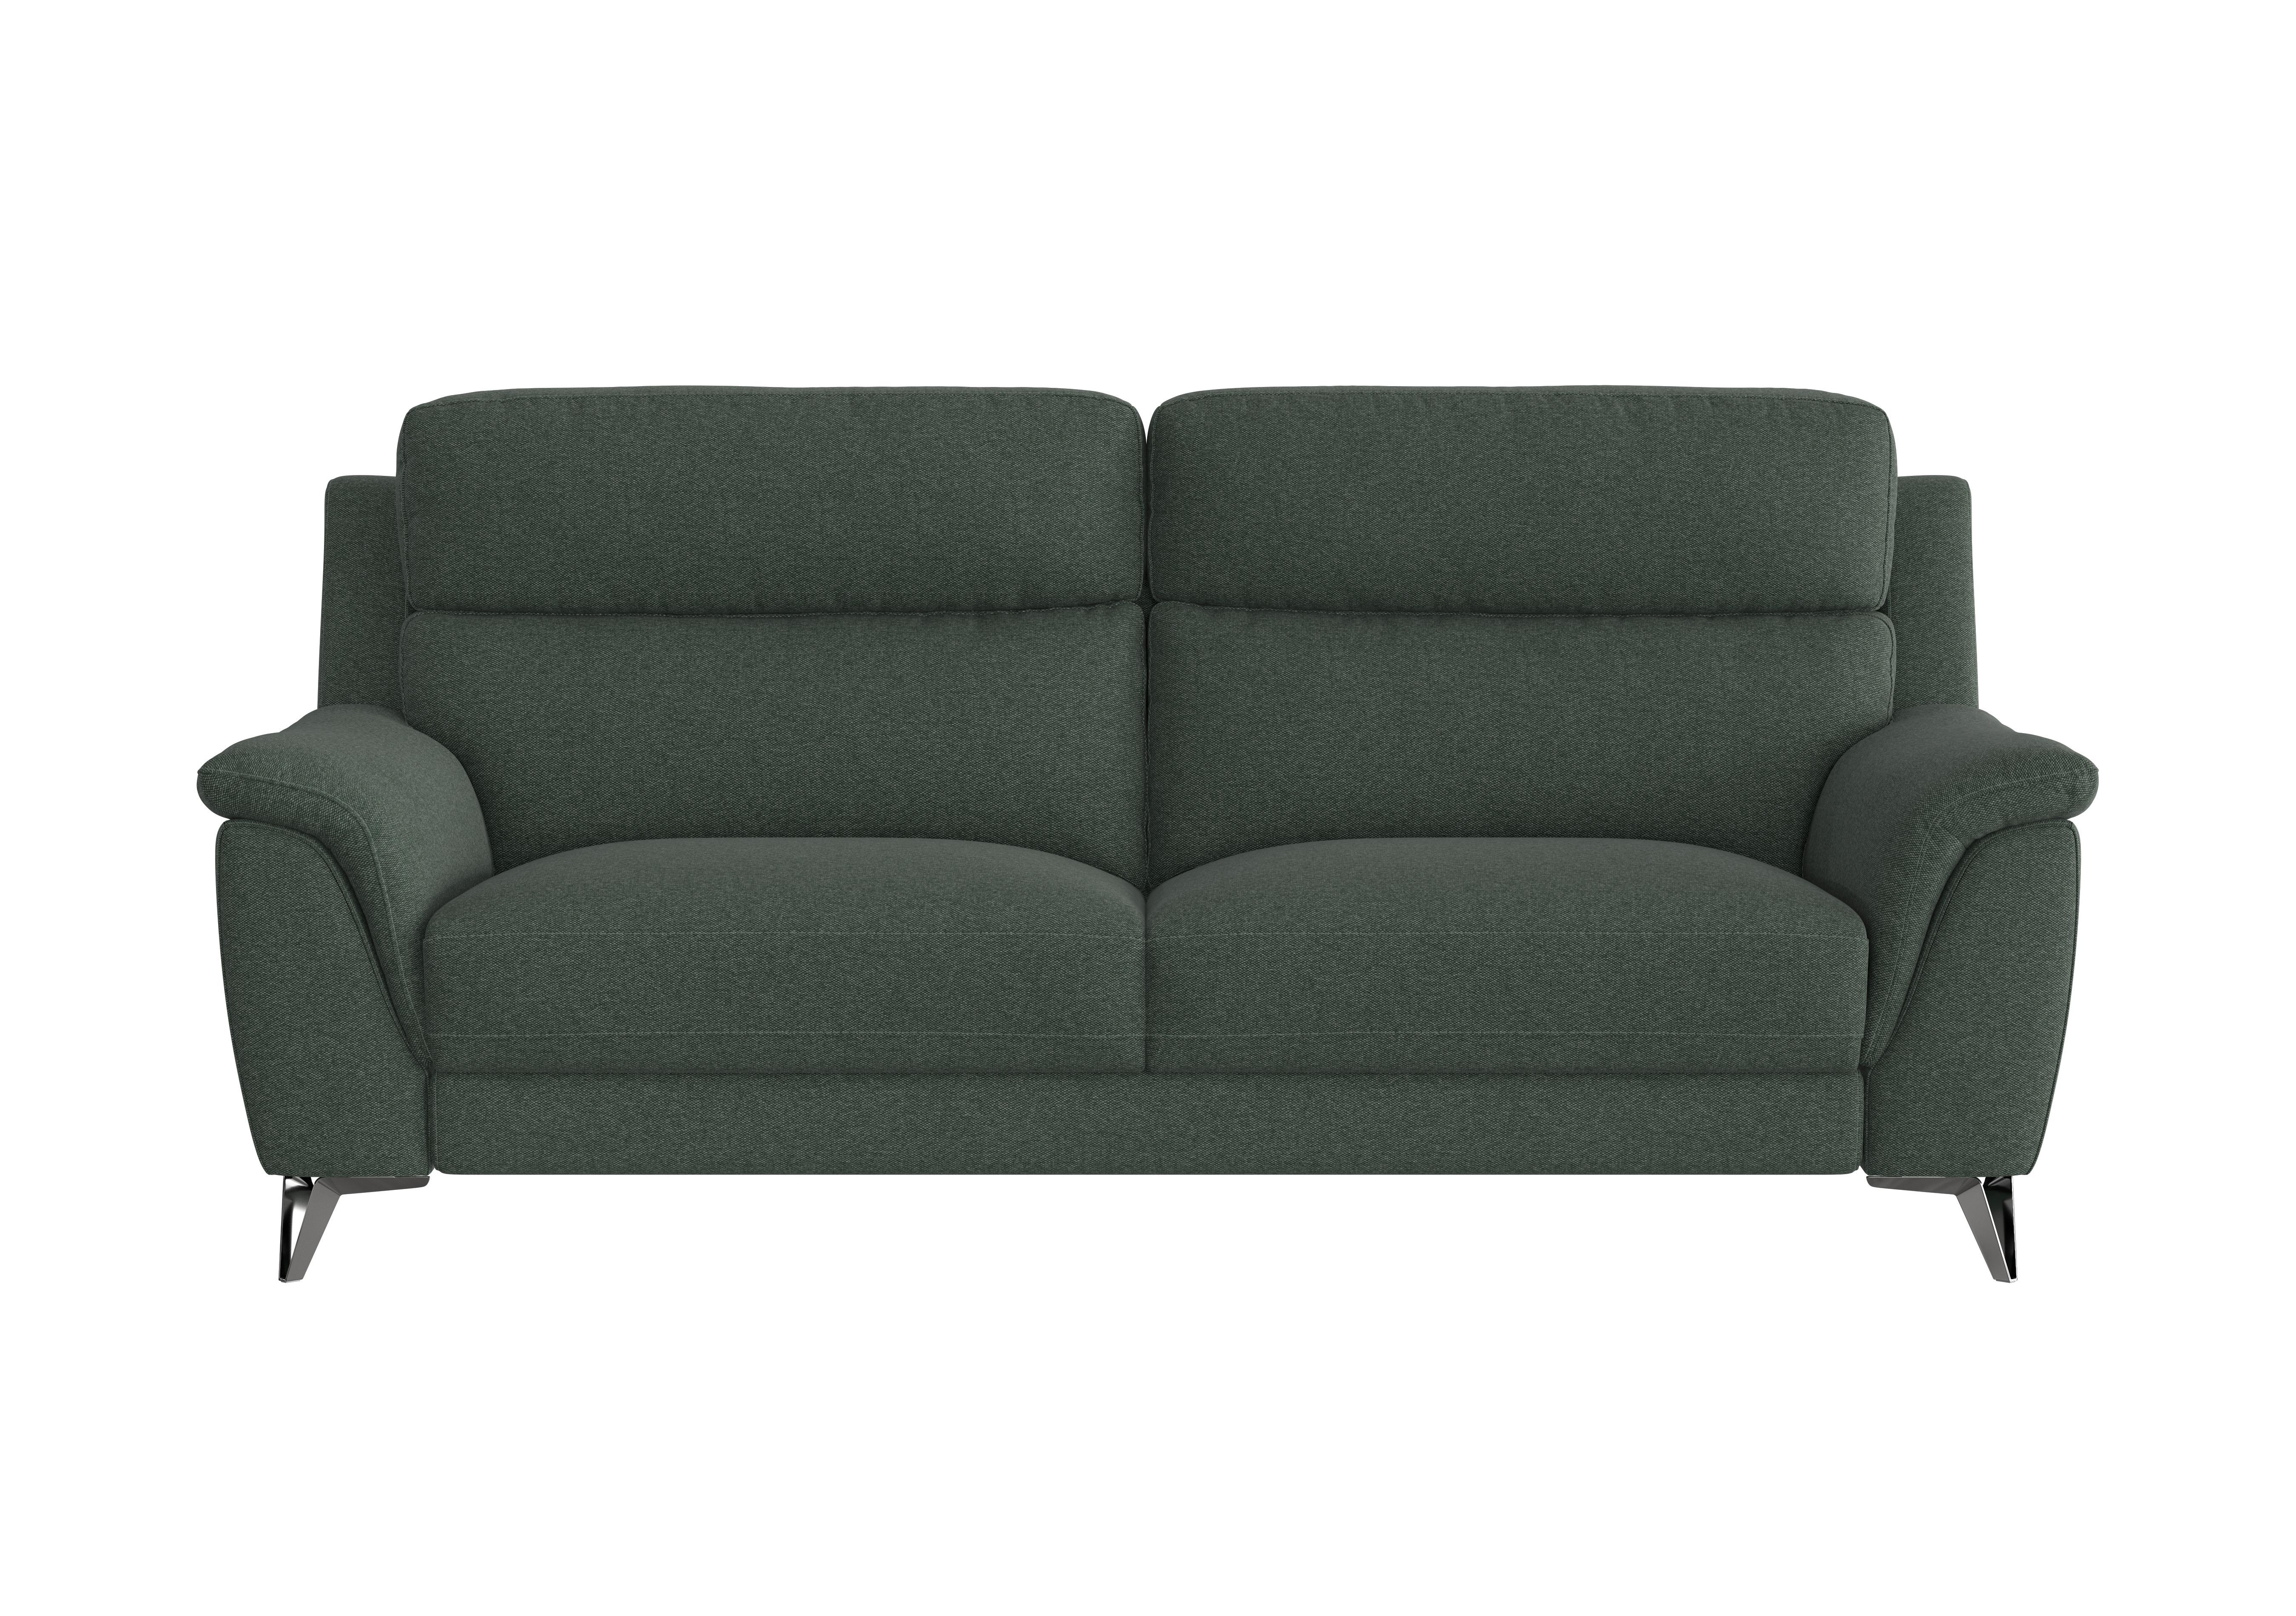 Contempo 3 Seater Fabric Sofa in Fab-Ska-R48 Moss Green on Furniture Village